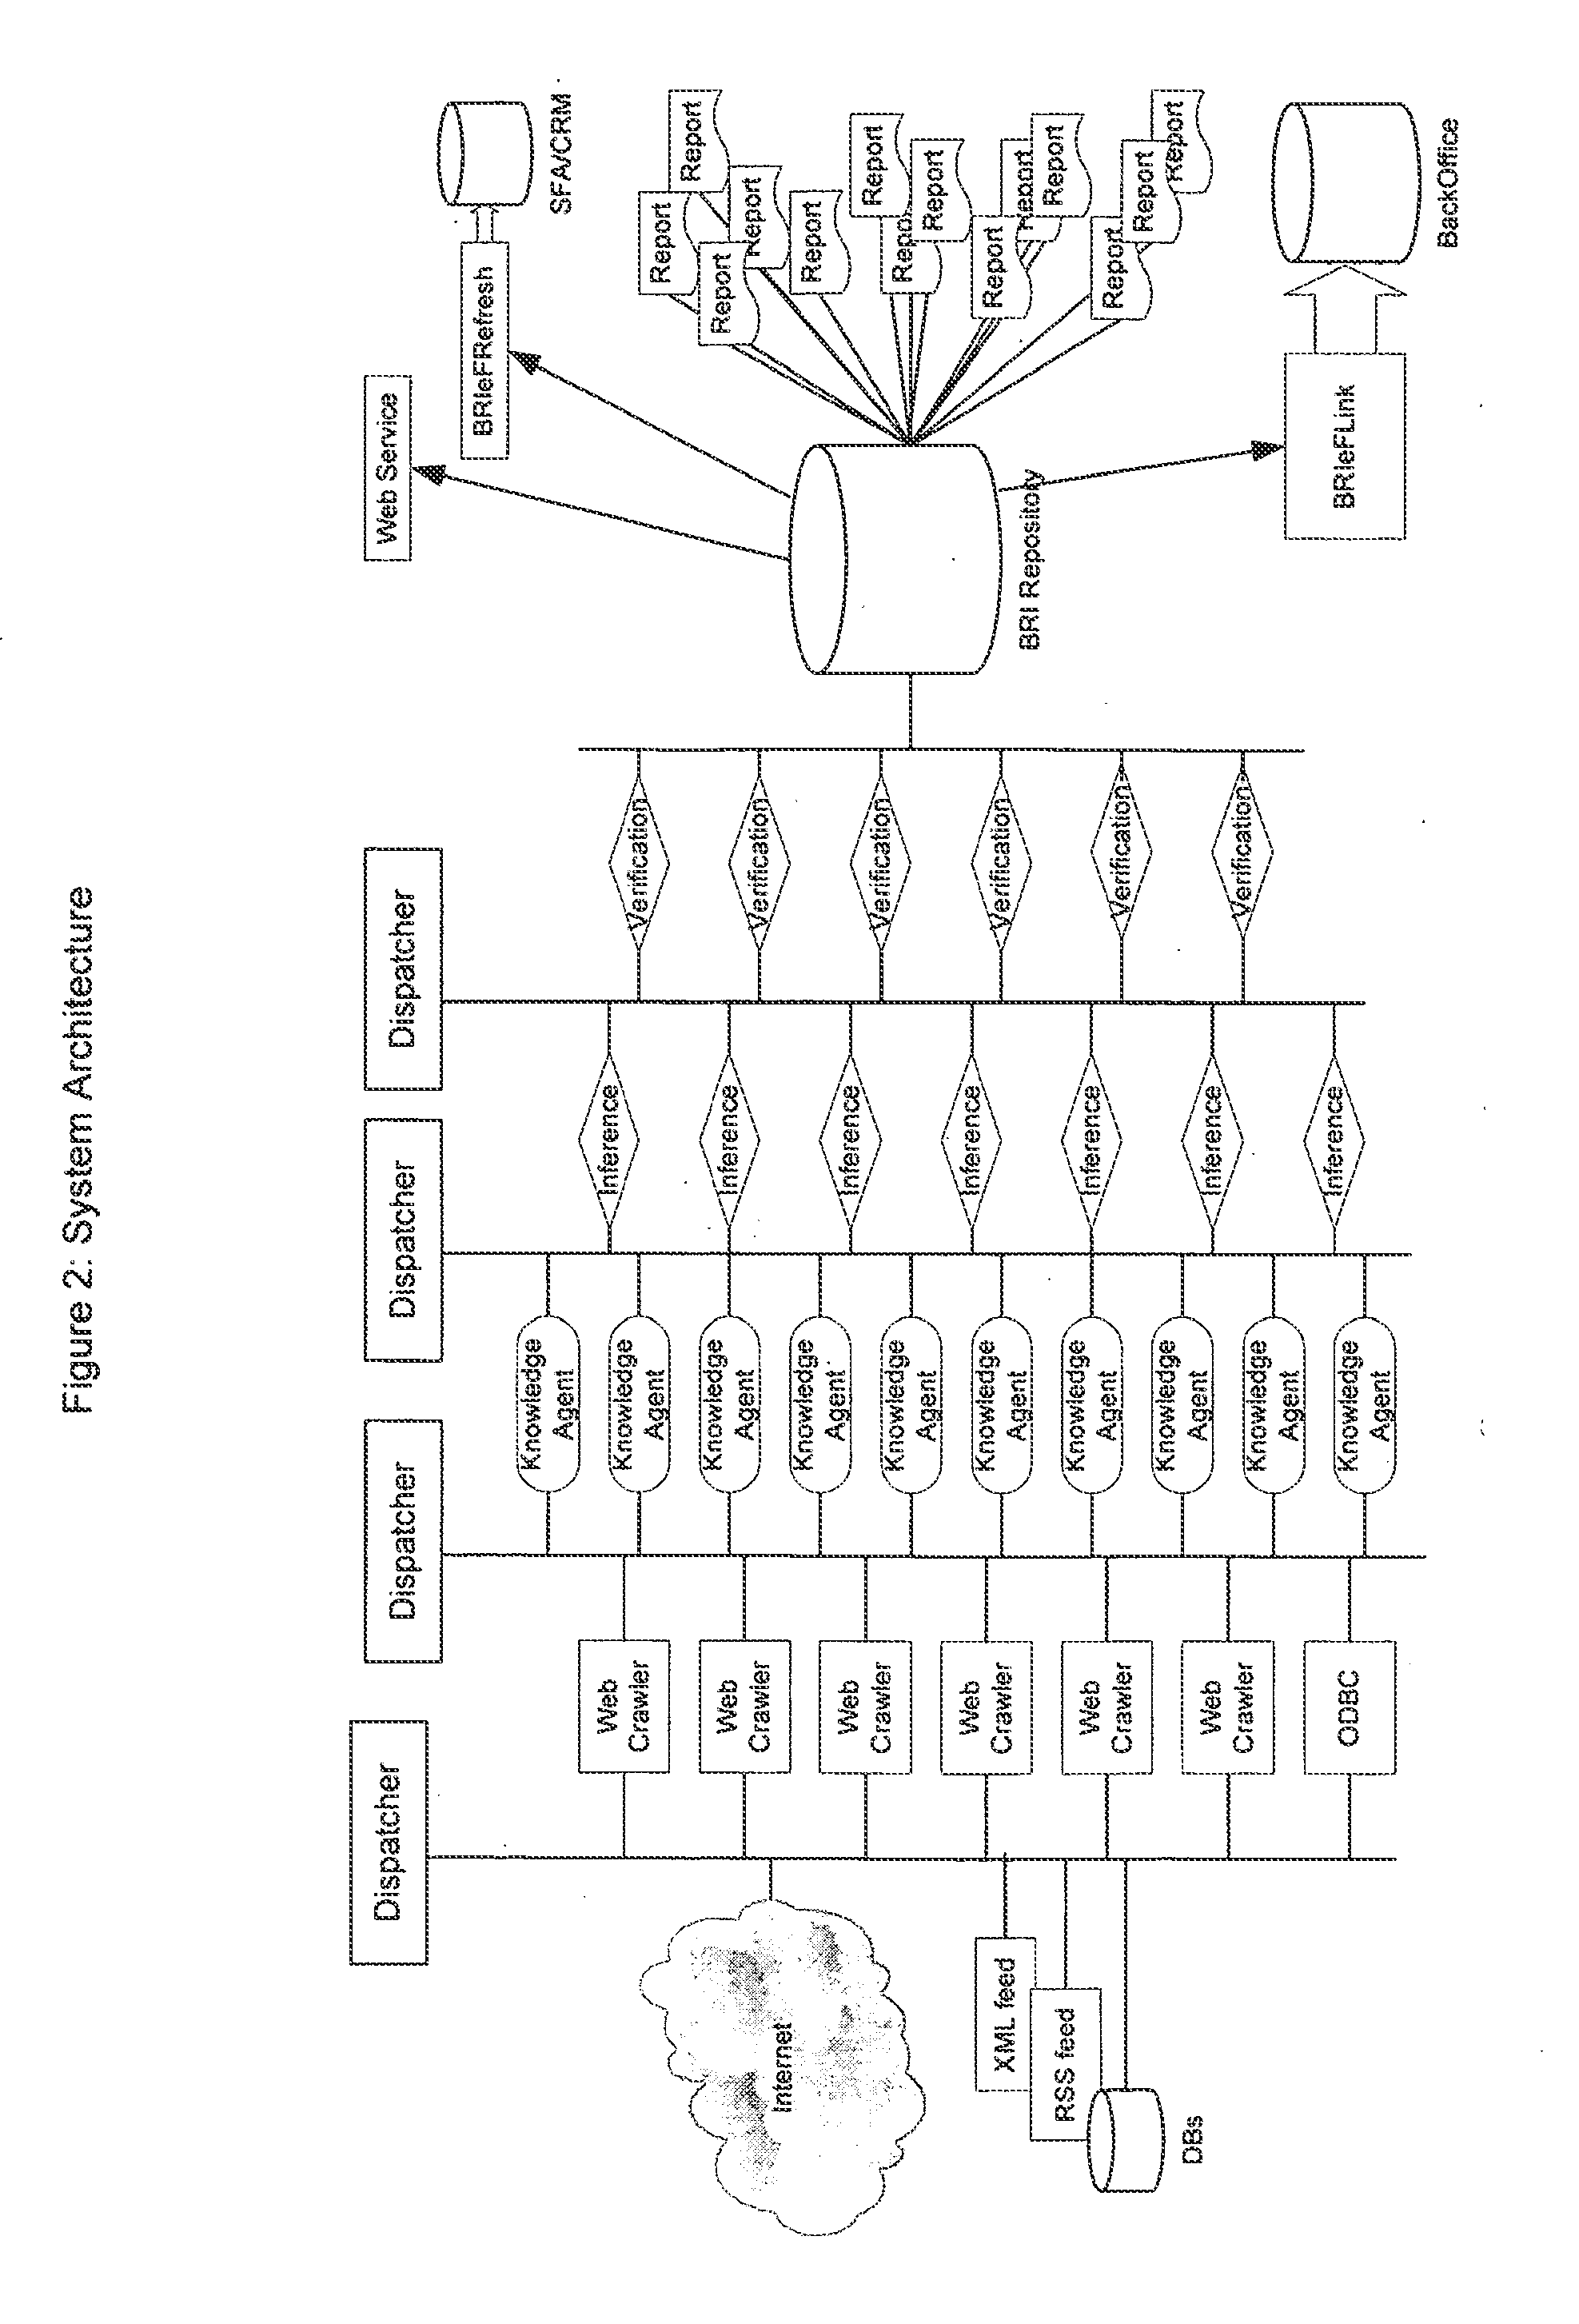 System and method for automatic fact extraction from images of domain-specific documents with further web verification